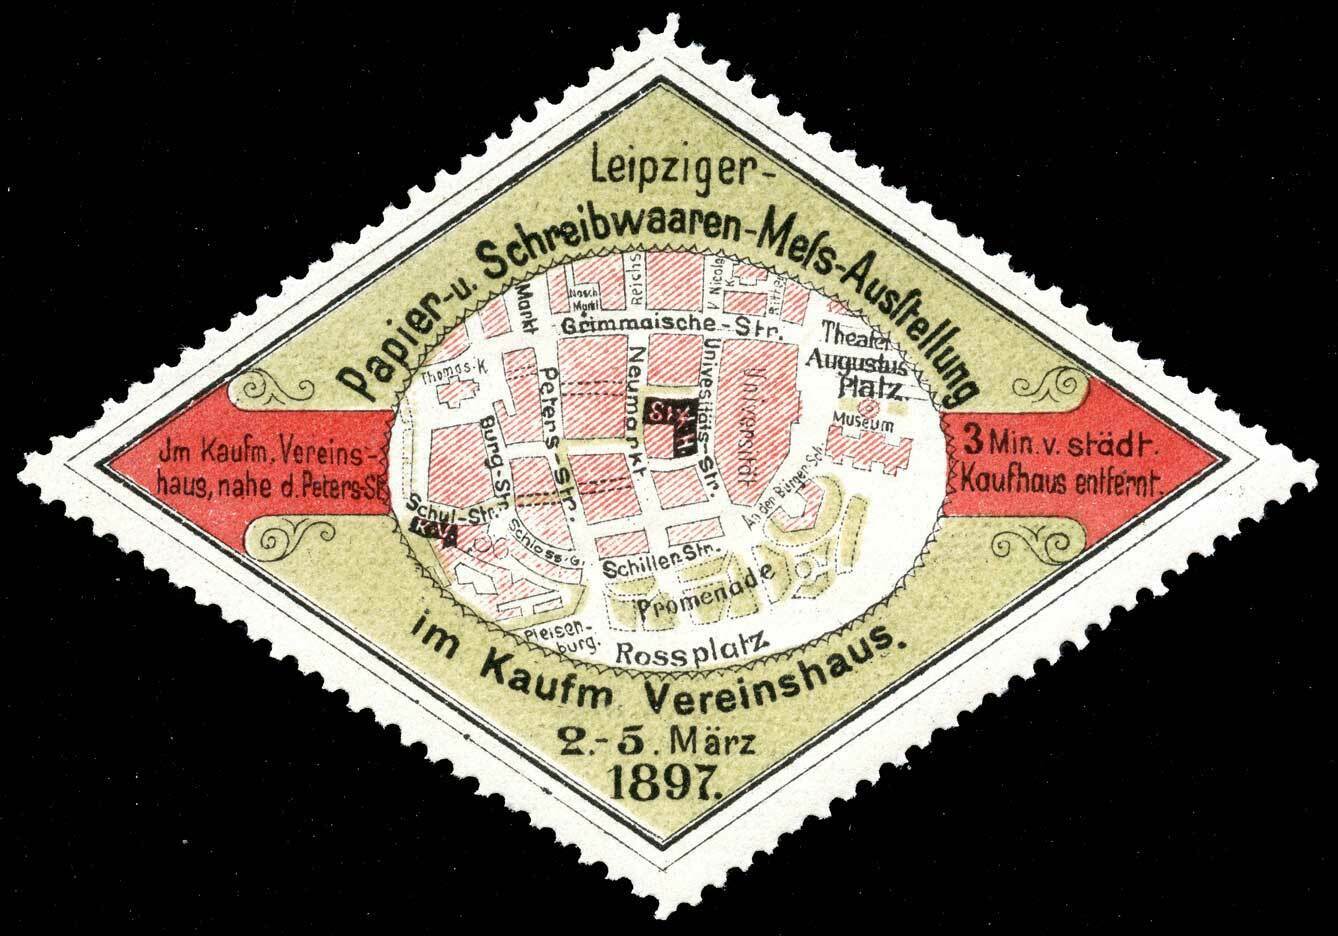 Germany Poster Stamp - 1897 Leipzig Office Exhibition And Paper Fair - Type 1